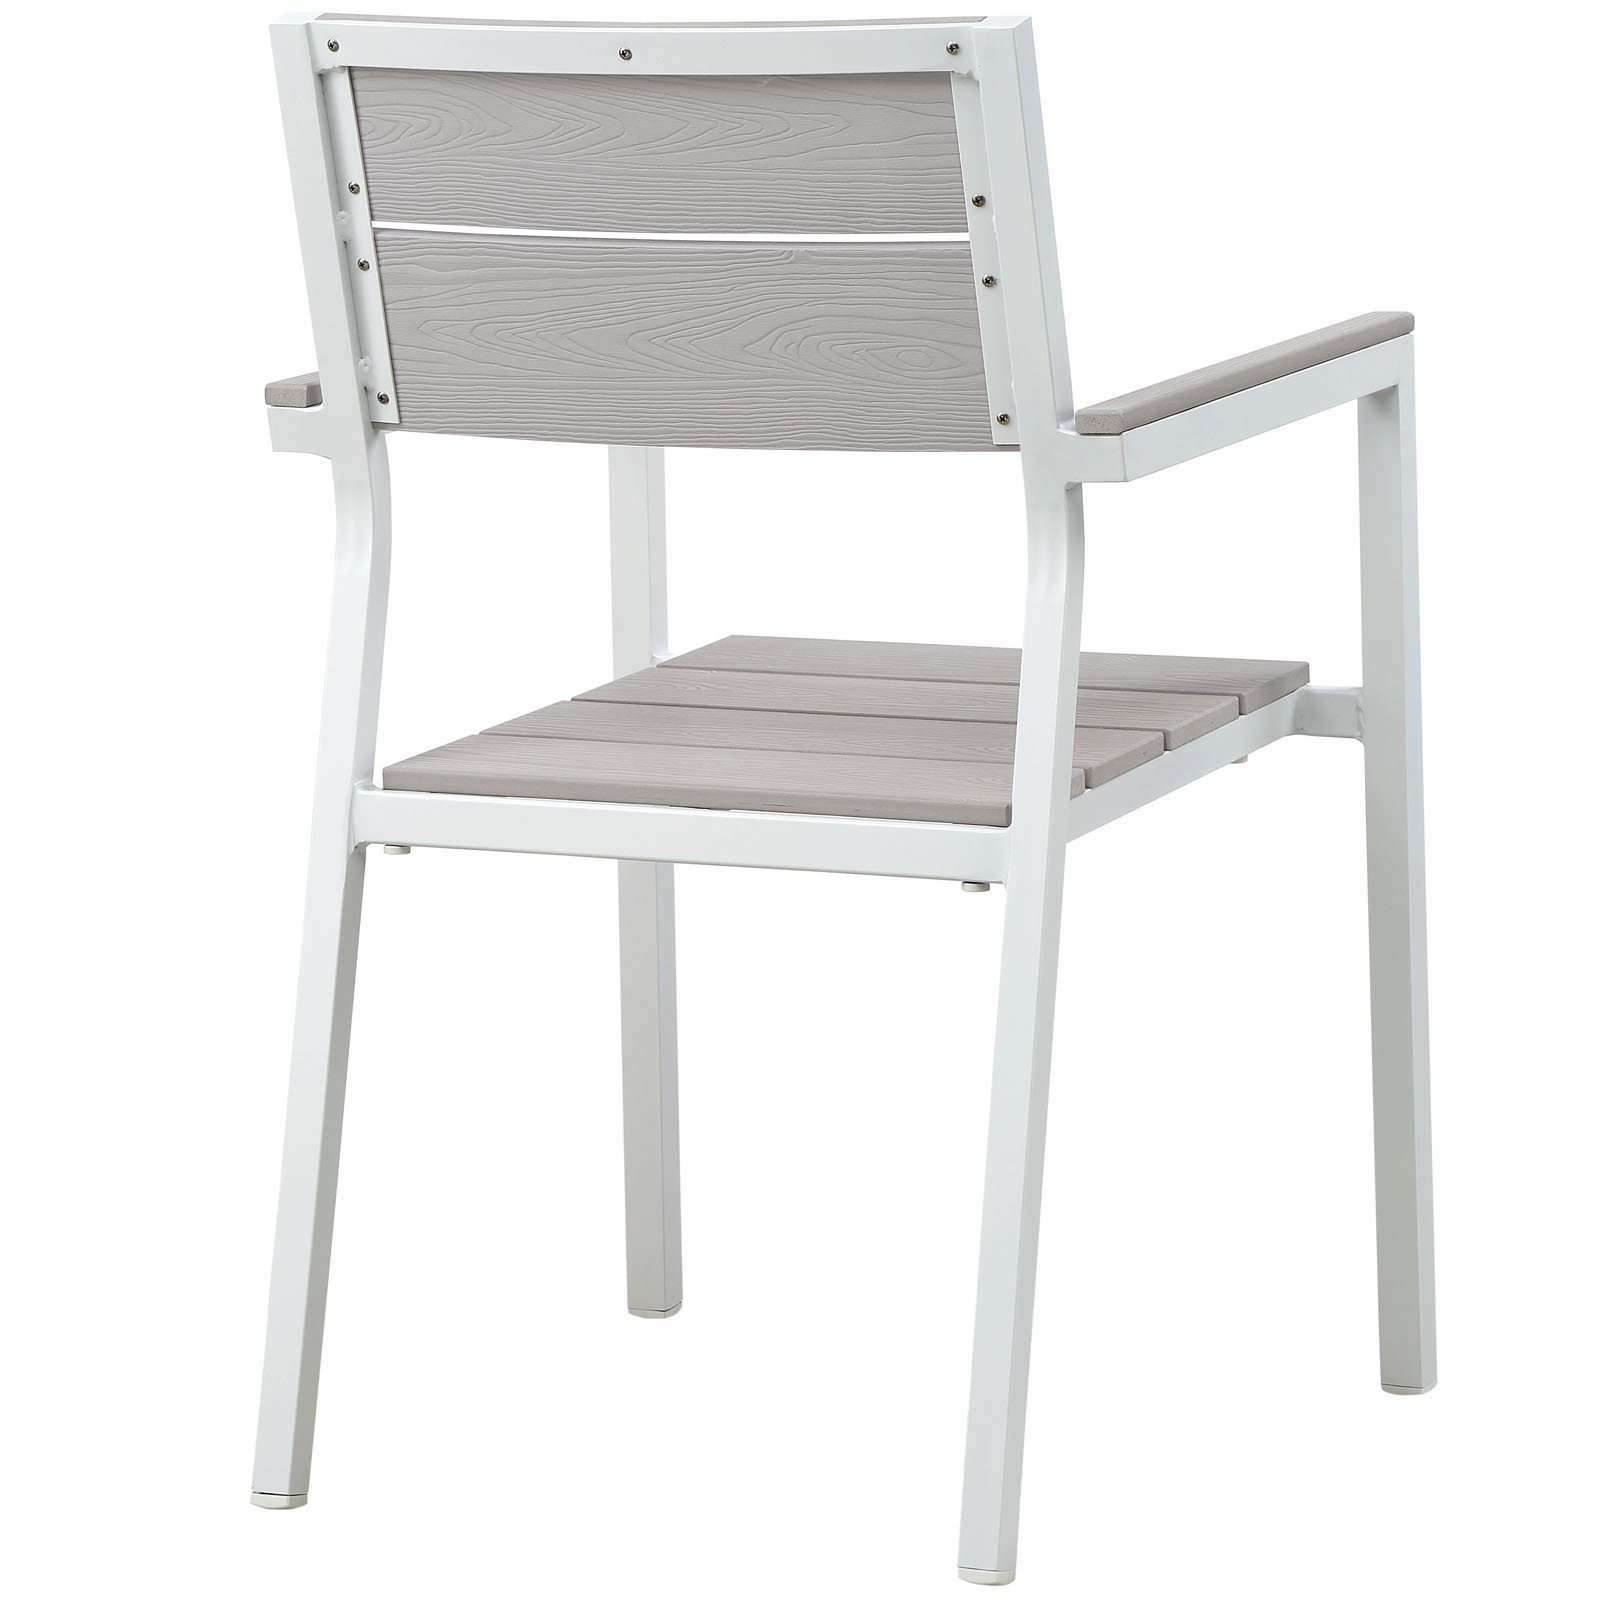 Modway Maine 3 Piece Outdoor Patio Dining Set in White Light Gray - image 5 of 7